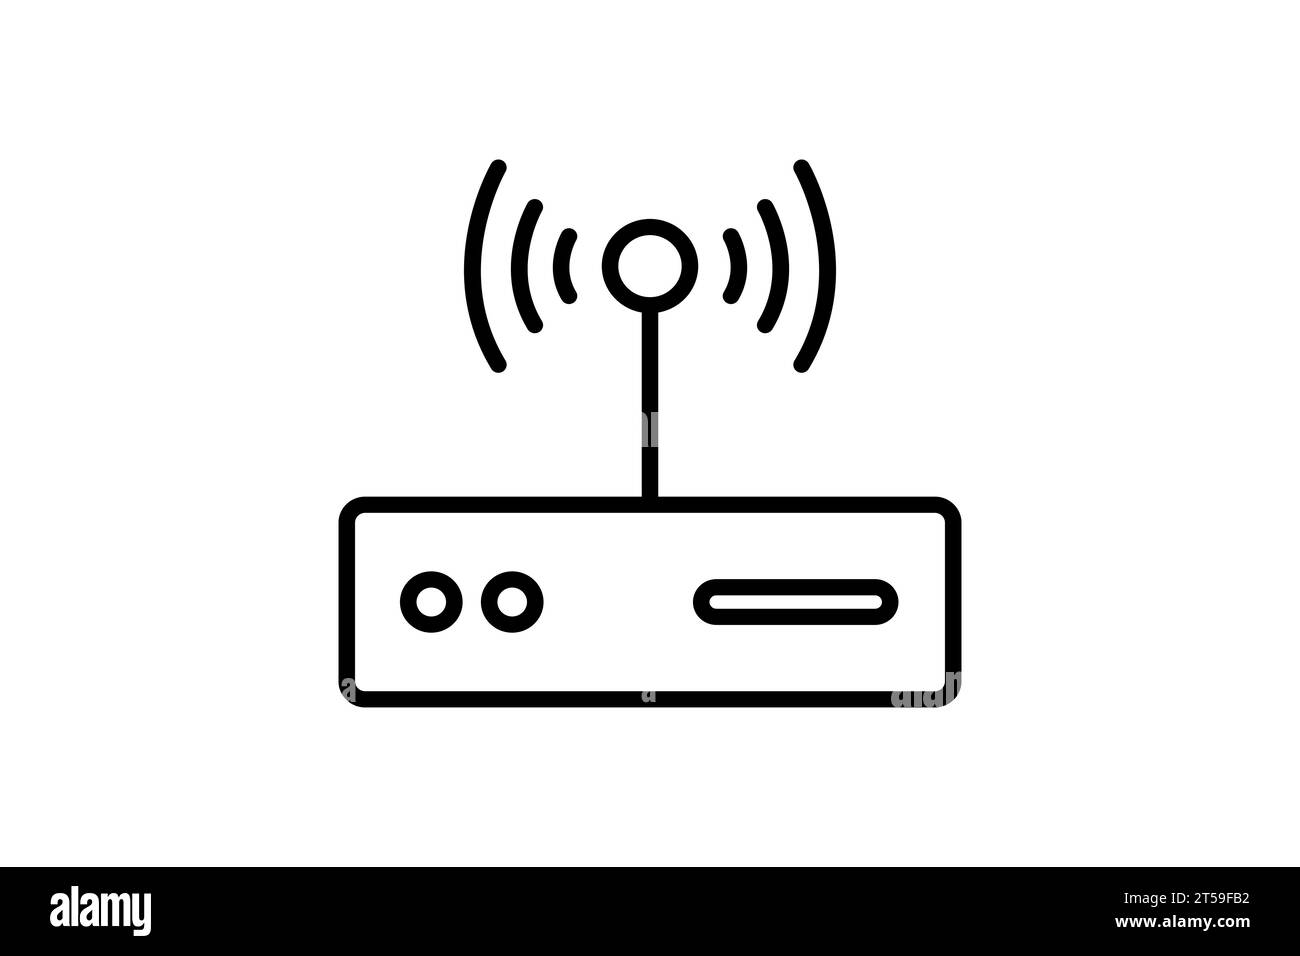 access point router icon. icon related to device, computer technology, network. line icon style. simple vector design editable Stock Vector